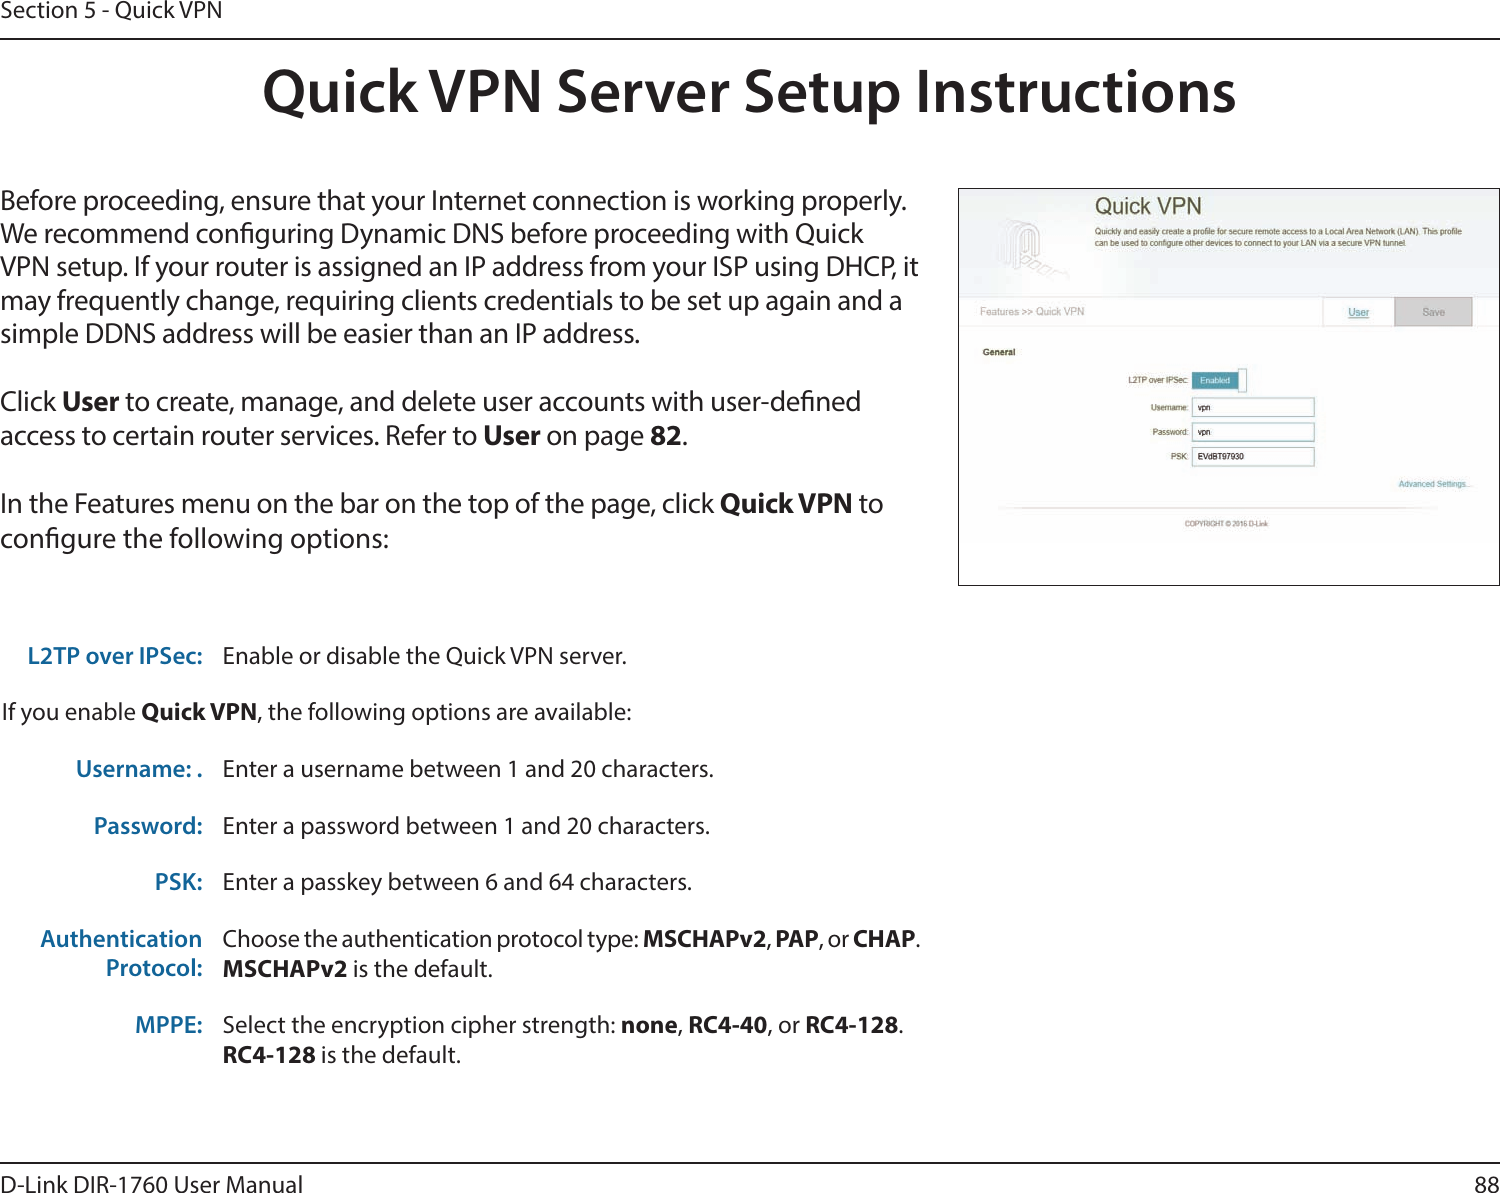 88D-Link DIR-1760 User ManualSection 5 - Quick VPNQuick VPN Server Setup InstructionsBefore proceeding, ensure that your Internet connection is working properly. We recommend conguring Dynamic DNS before proceeding with Quick VPN setup. If your router is assigned an IP address from your ISP using DHCP, it may frequently change, requiring clients credentials to be set up again and a simple DDNS address will be easier than an IP address. Click User to create, manage, and delete user accounts with user-dened access to certain router services. Refer to User on page 82.In the Features menu on the bar on the top of the page, click Quick VPN to congure the following options:L2TP over IPSec: Enable or disable the Quick VPN server.If you enable Quick VPN, the following options are available:Username: . Enter a username between 1 and 20 characters.Password: Enter a password between 1 and 20 characters.PSK: Enter a passkey between 6 and 64 characters.AuthenticationProtocol:Choose the authentication protocol type: MSCHAPv2, PAP, or CHAP.MSCHAPv2 is the default.MPPE: Select the encryption cipher strength: none, RC4-40, or RC4-128.RC4-128 is the default.